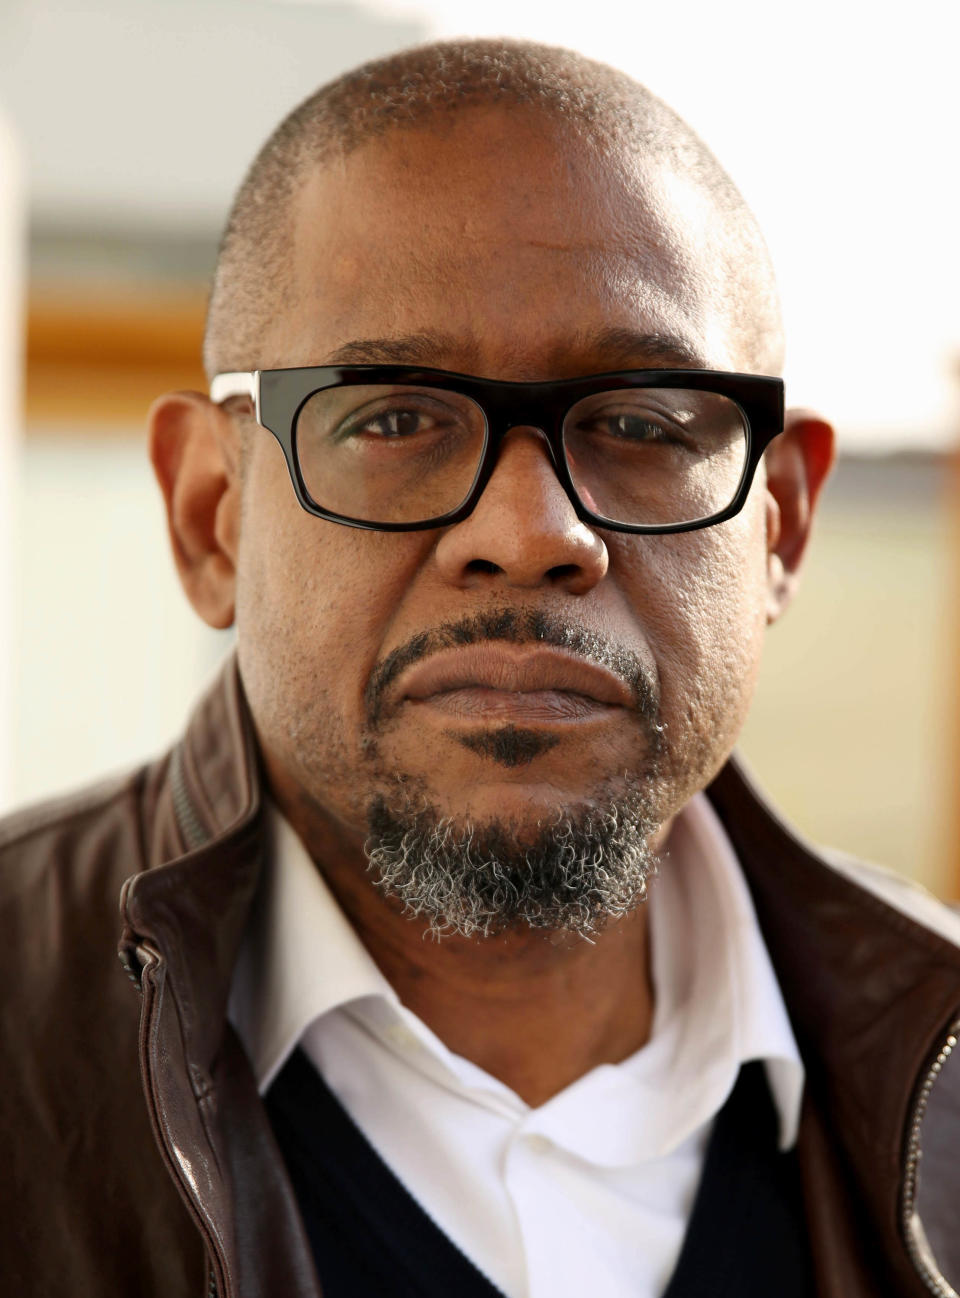 In this Tuesday, Feb. 4, 2014 photo, actor Forest Whitaker, who stars in the upcoming film "Repentance," poses for a portrait in Los Angeles. Receiving accolades isn't Whitaker's prime motivation. He's won an Oscar and Golden Globe before, but it's always been about the craft for the veteran actor. (Photo by Matt Sayles/Invision/AP)